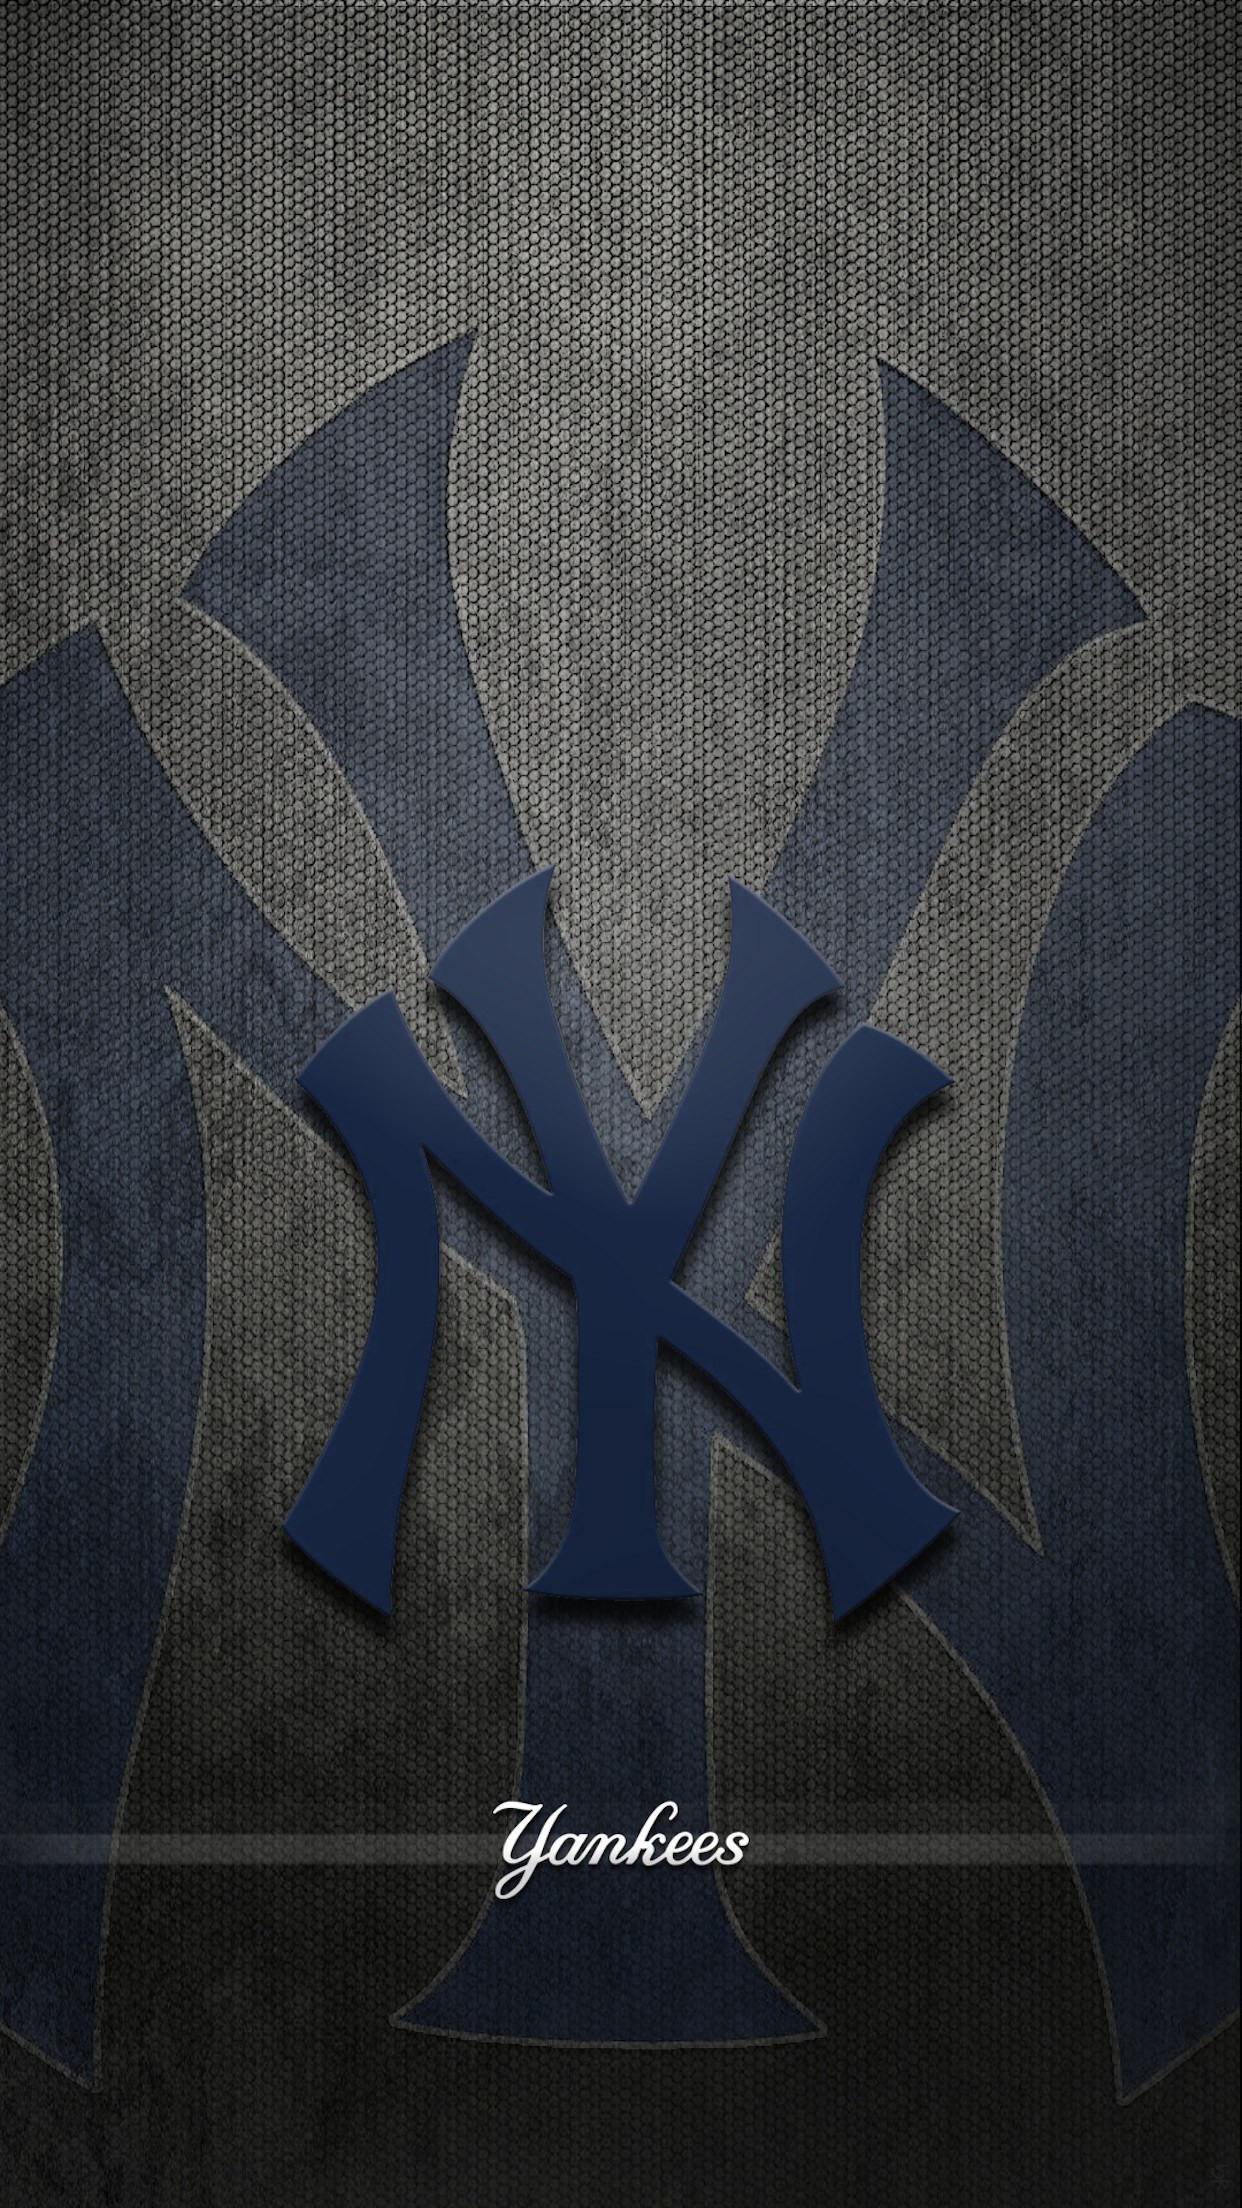 1242x2208 New York Yankees Wallpaper Iphone Beautiful Iphone 6 7 Plus Wallpaper  Request Thread Page 121